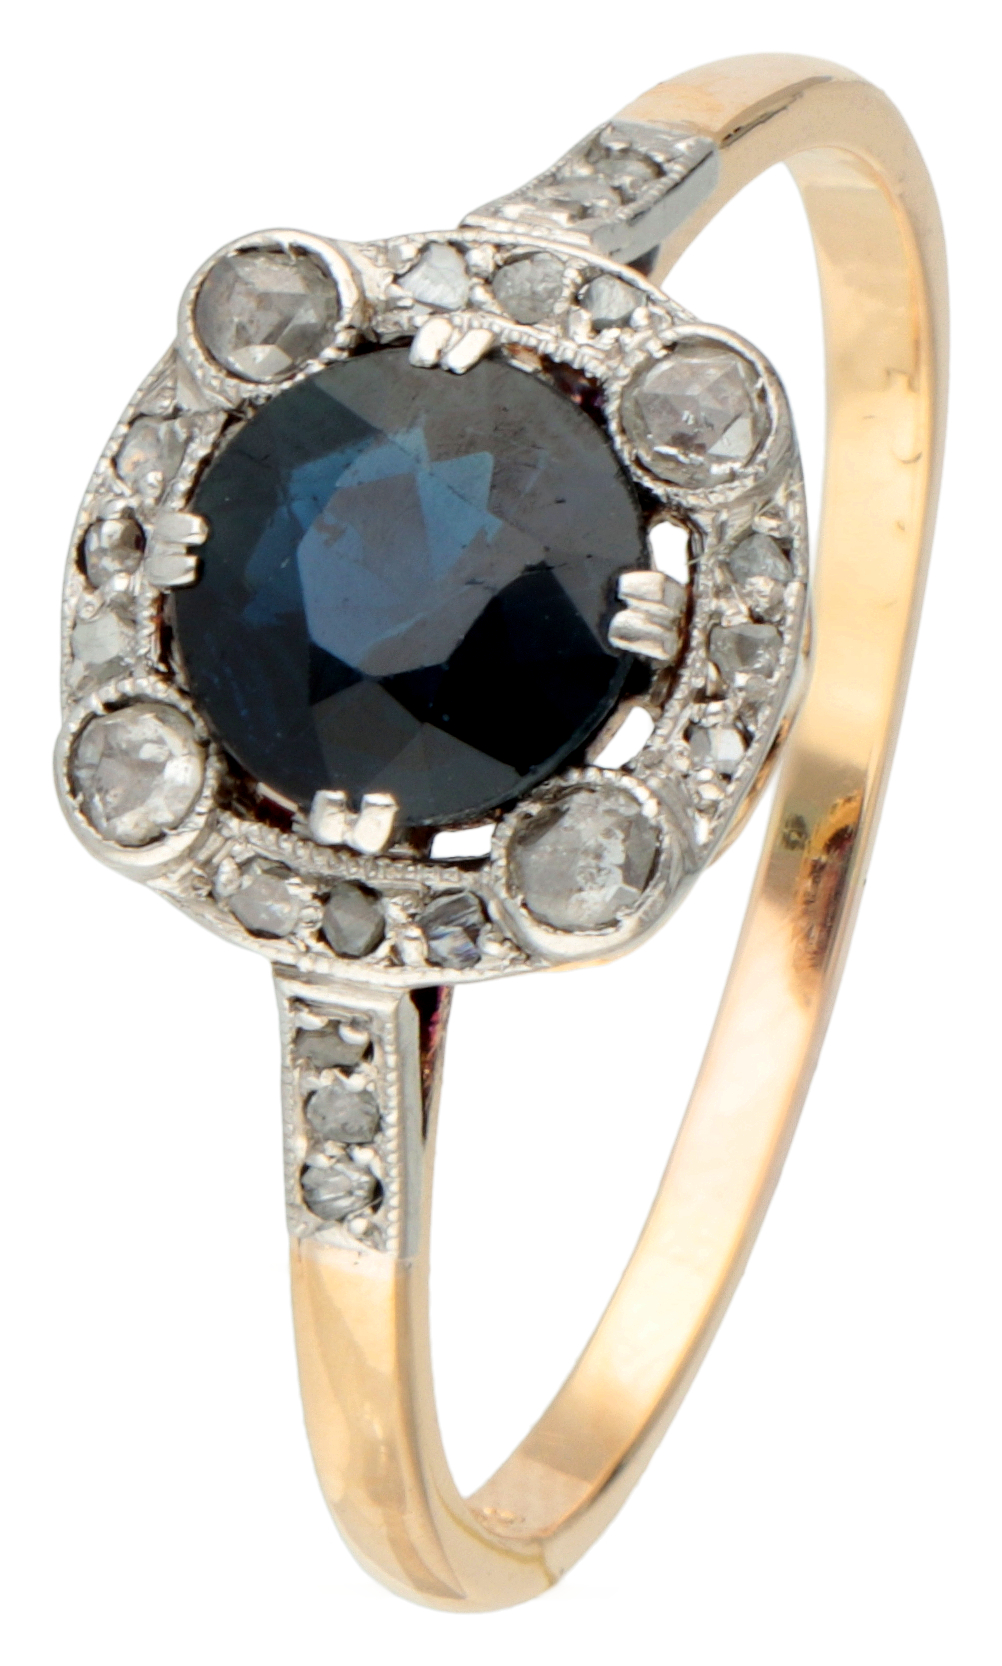 French 18K. yellow gold Art Deco ring set with approx. 0.83 ct. natural sapphire and diamond.